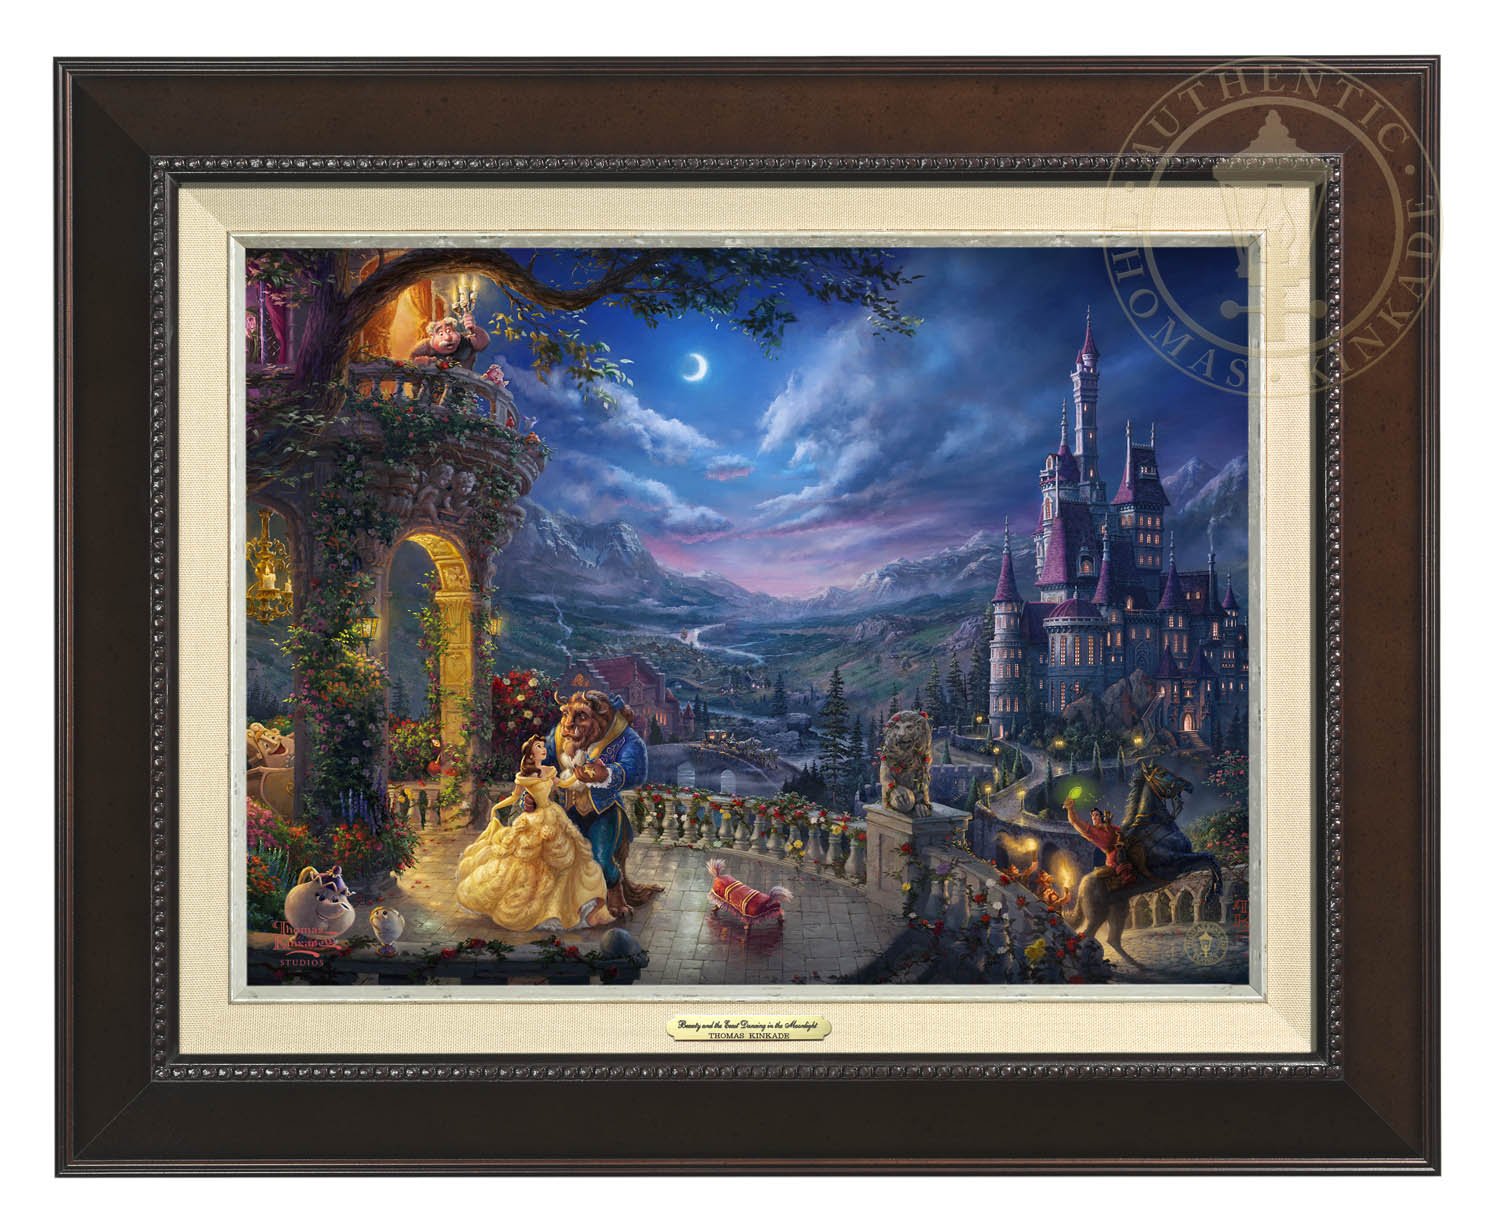 Belle and the Beast celebrate their love under the dreamy moonlit sky, with all their friend enjoying the moments - Espresso Frame